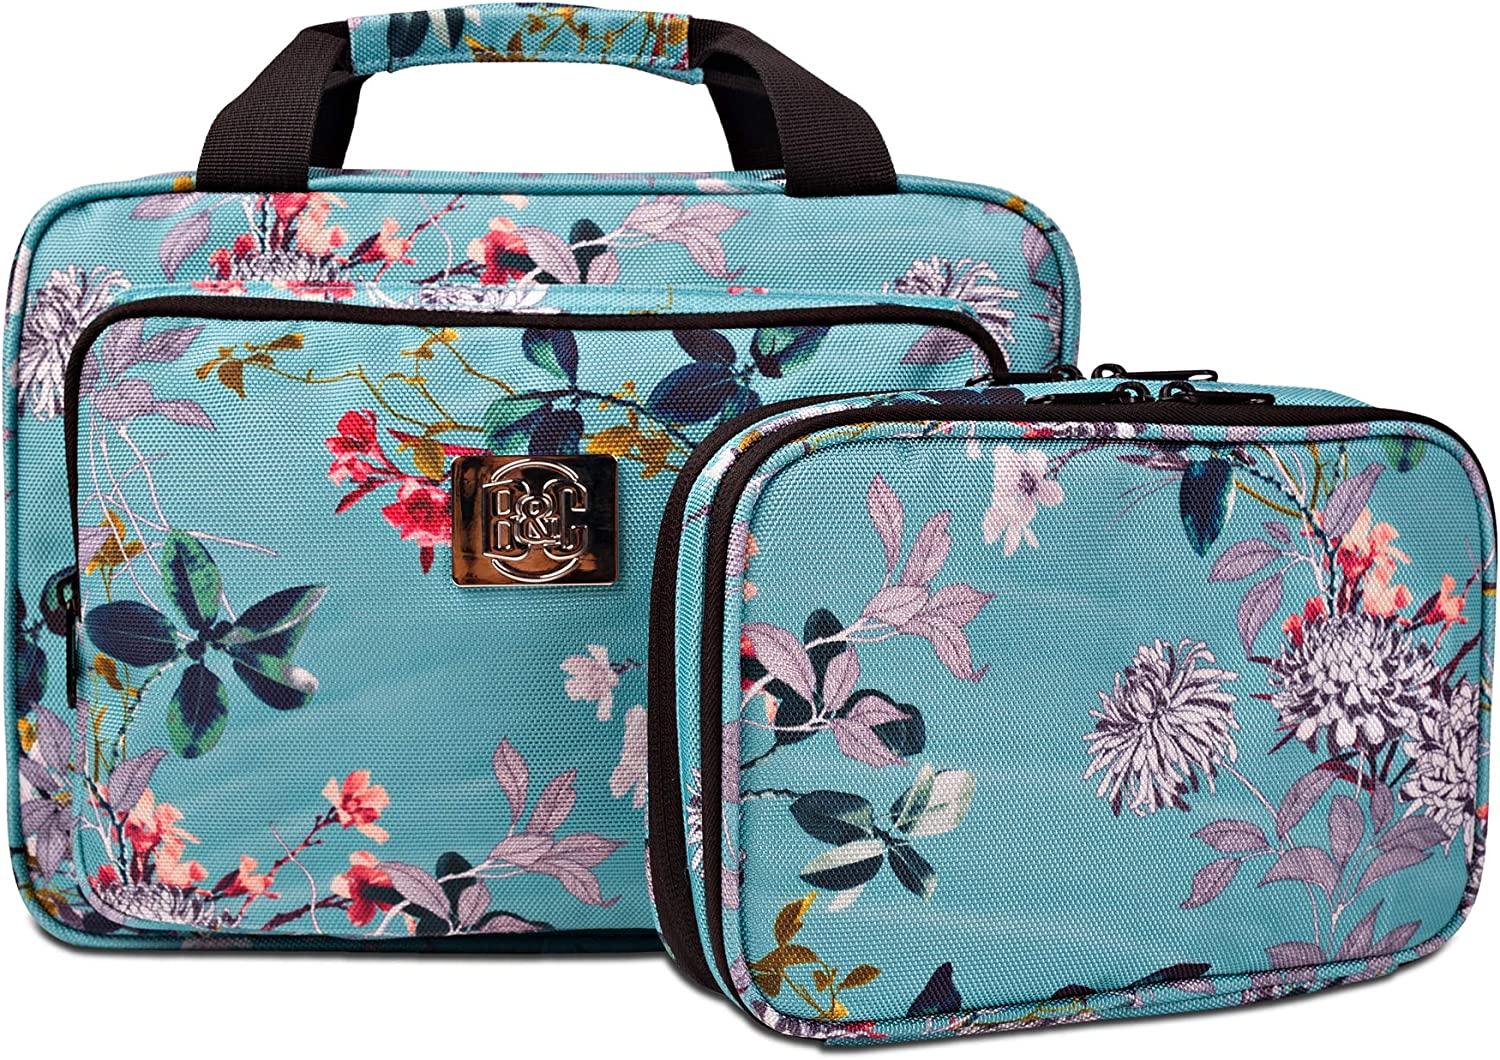 Miamica Women's Teal Inner Beauty Hanging Toiletry Bag Travel Organizer